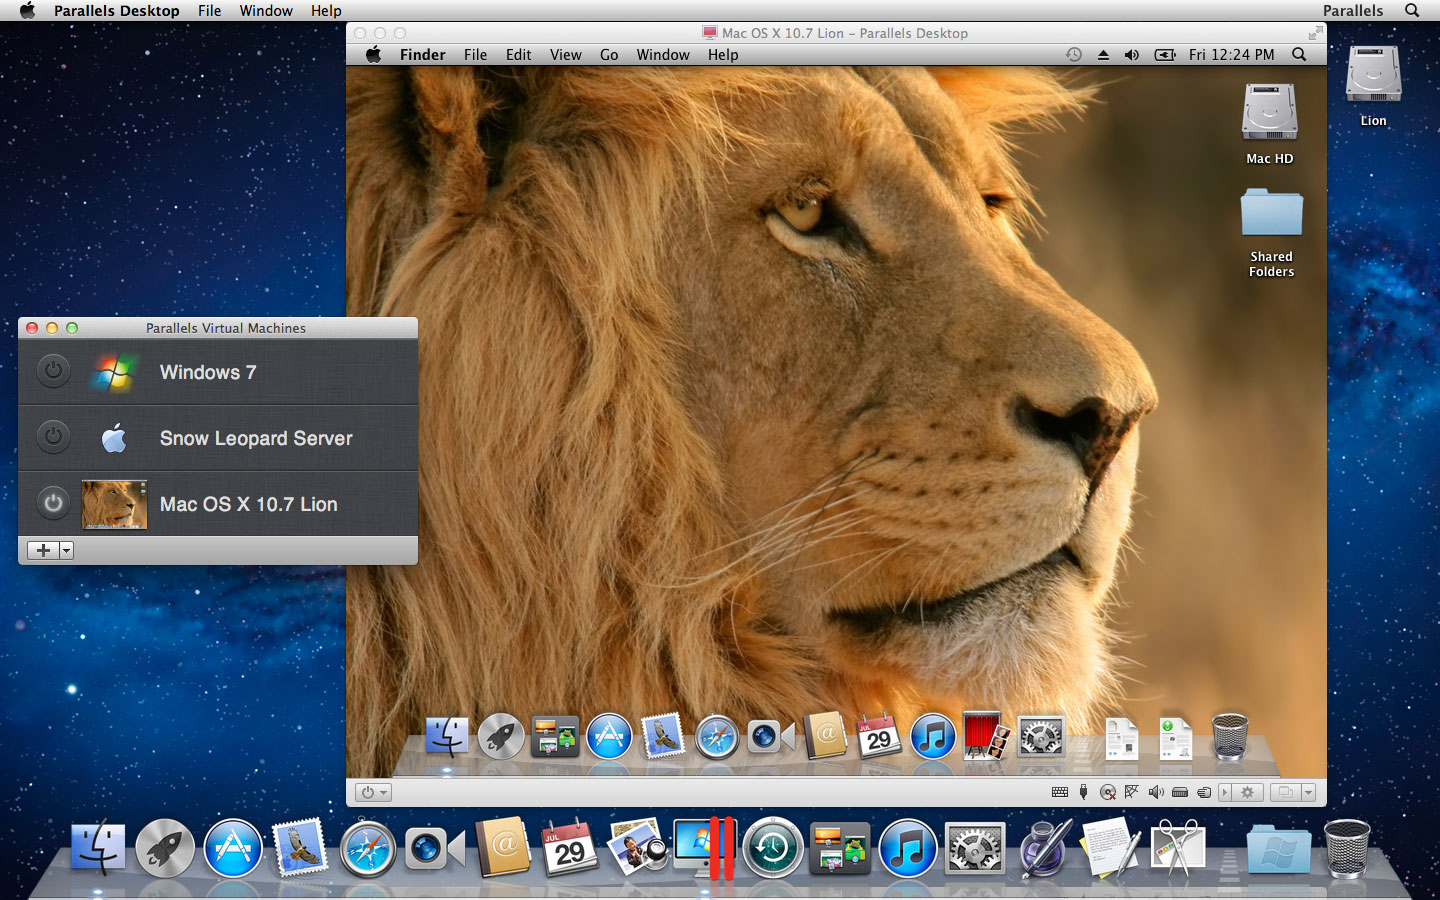 where can i get a download of osx lion for windows